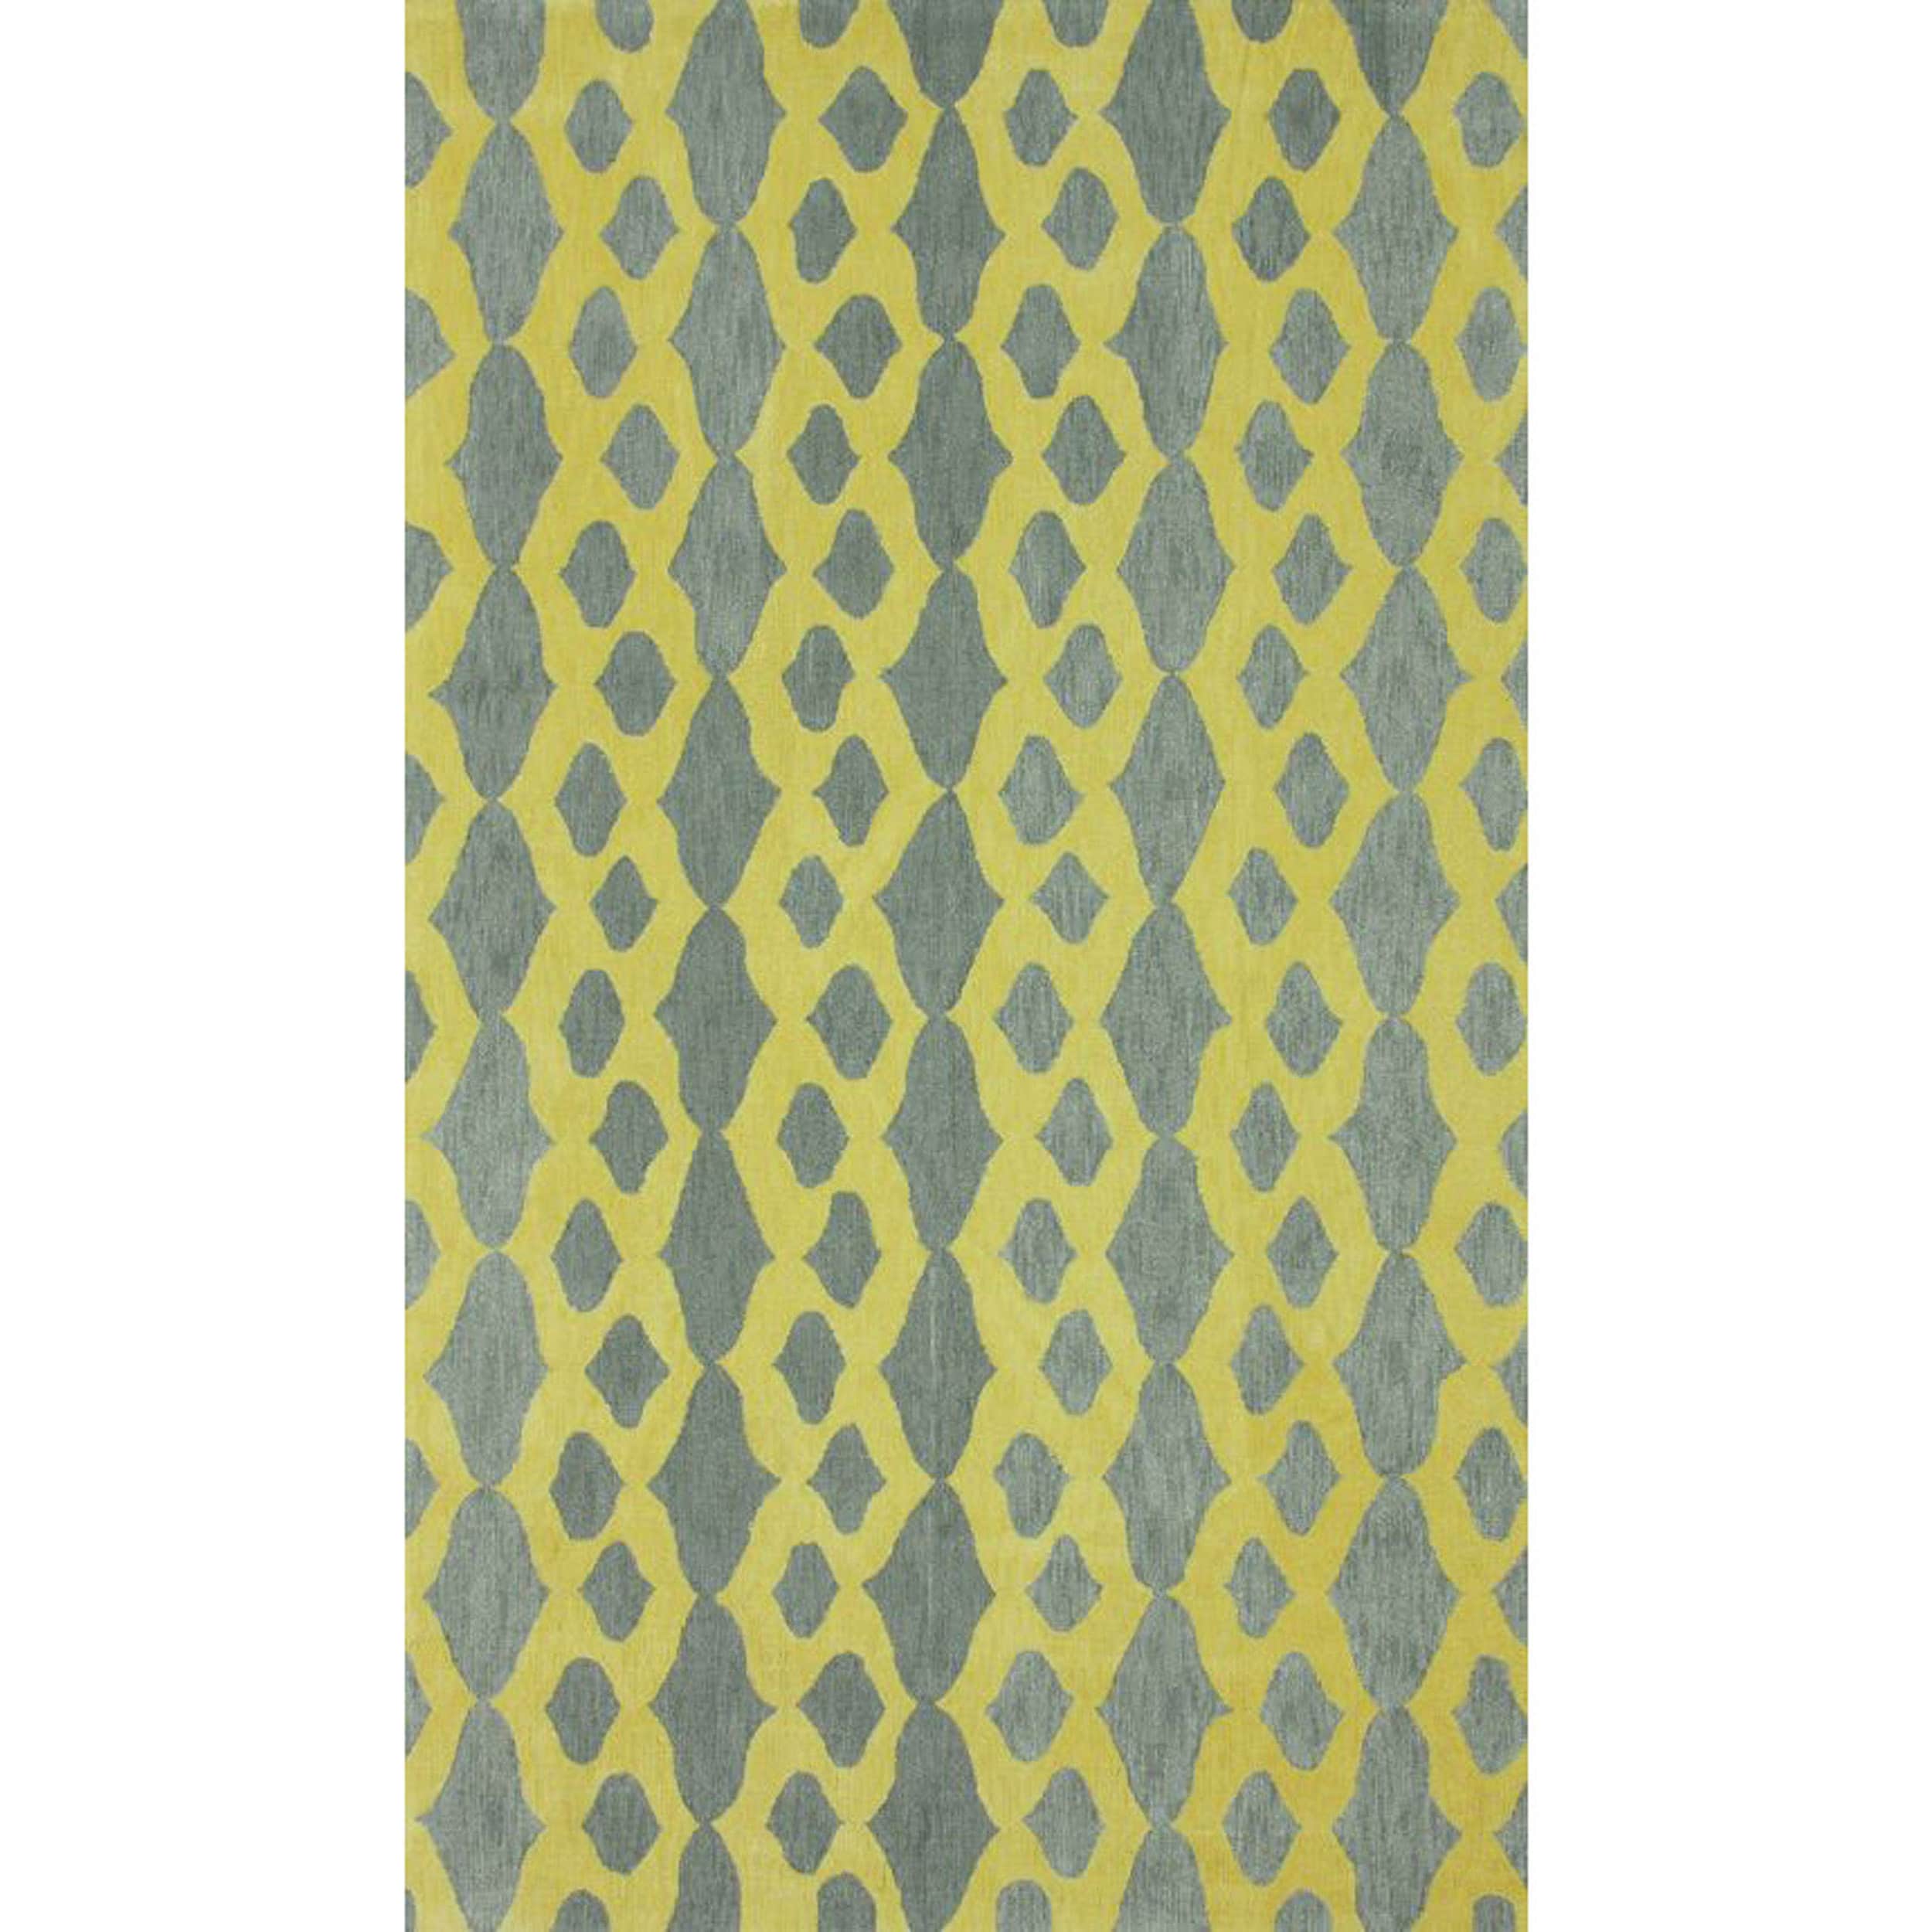 Nuloom Handmade Lattice Yellow Cotton Rug (5 X 8) (GreyPattern AbstractTip We recommend the use of a non skid pad to keep the rug in place on smooth surfaces.All rug sizes are approximate. Due to the difference of monitor colors, some rug colors may var